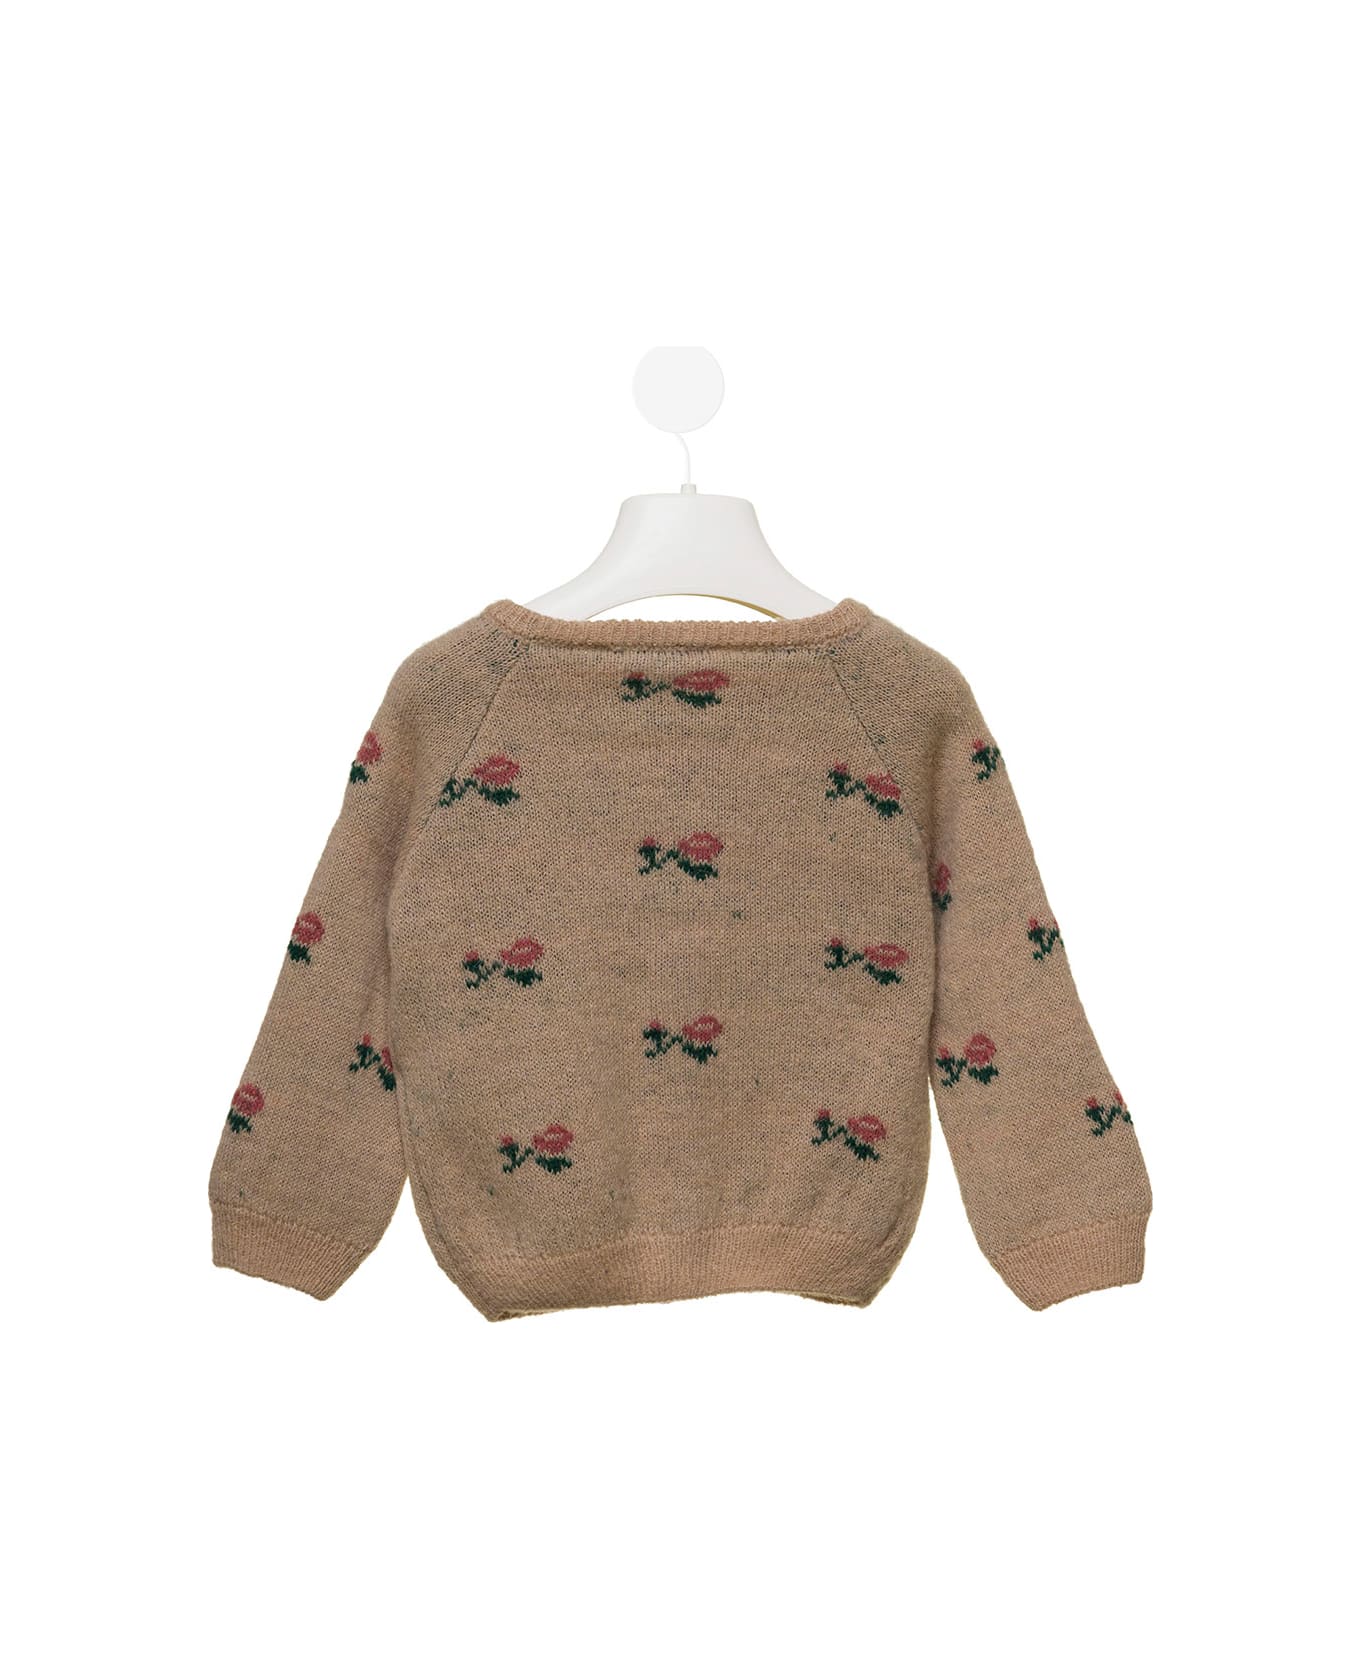 Emile Et Ida Kids Baby's Brown Cardigan With Floral Embroidery - Beige